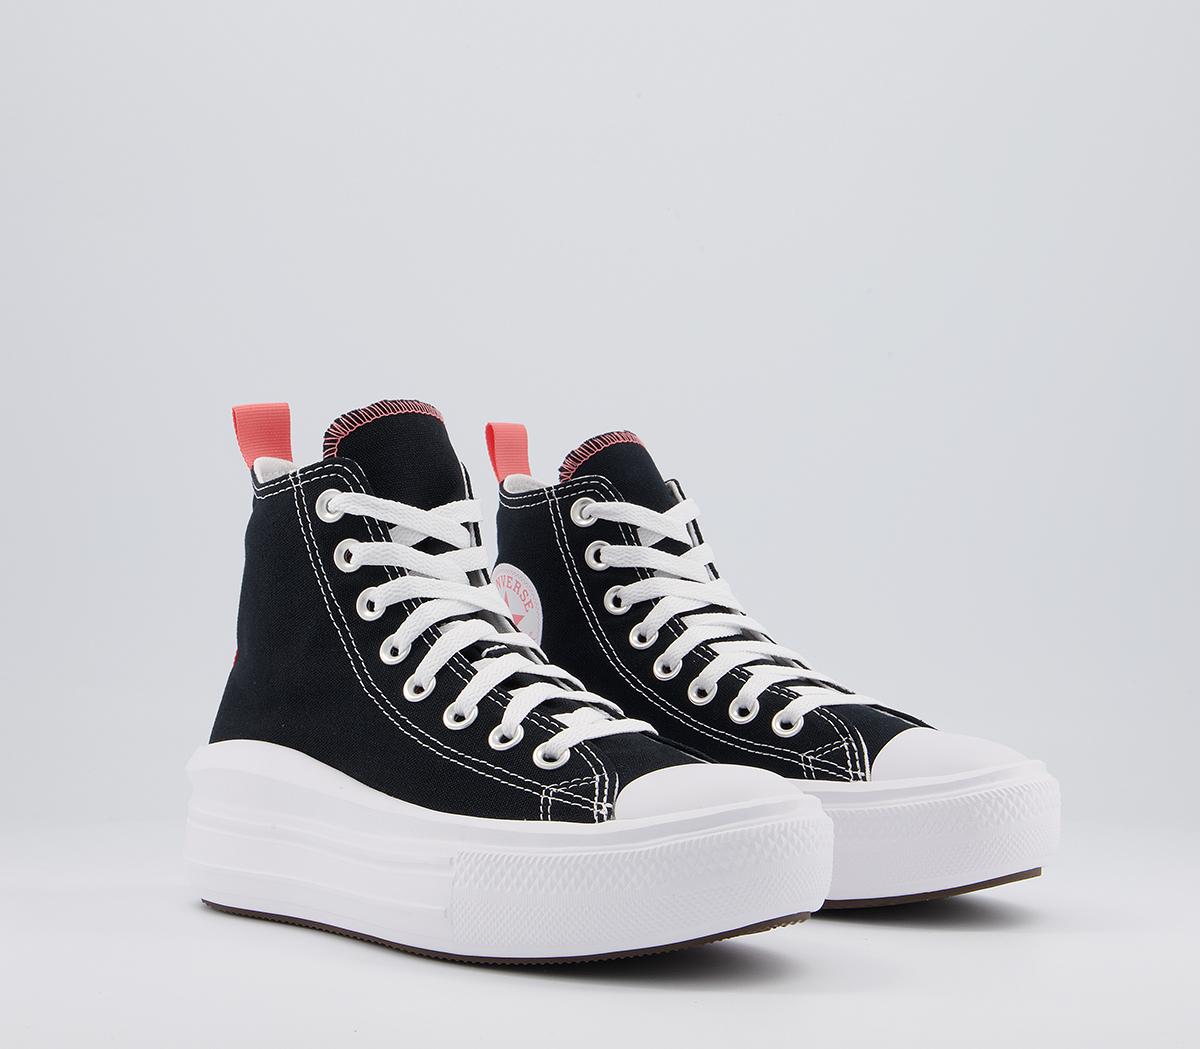 Converse All Star Move Gs Trainers Black Pink Salt White - Junior